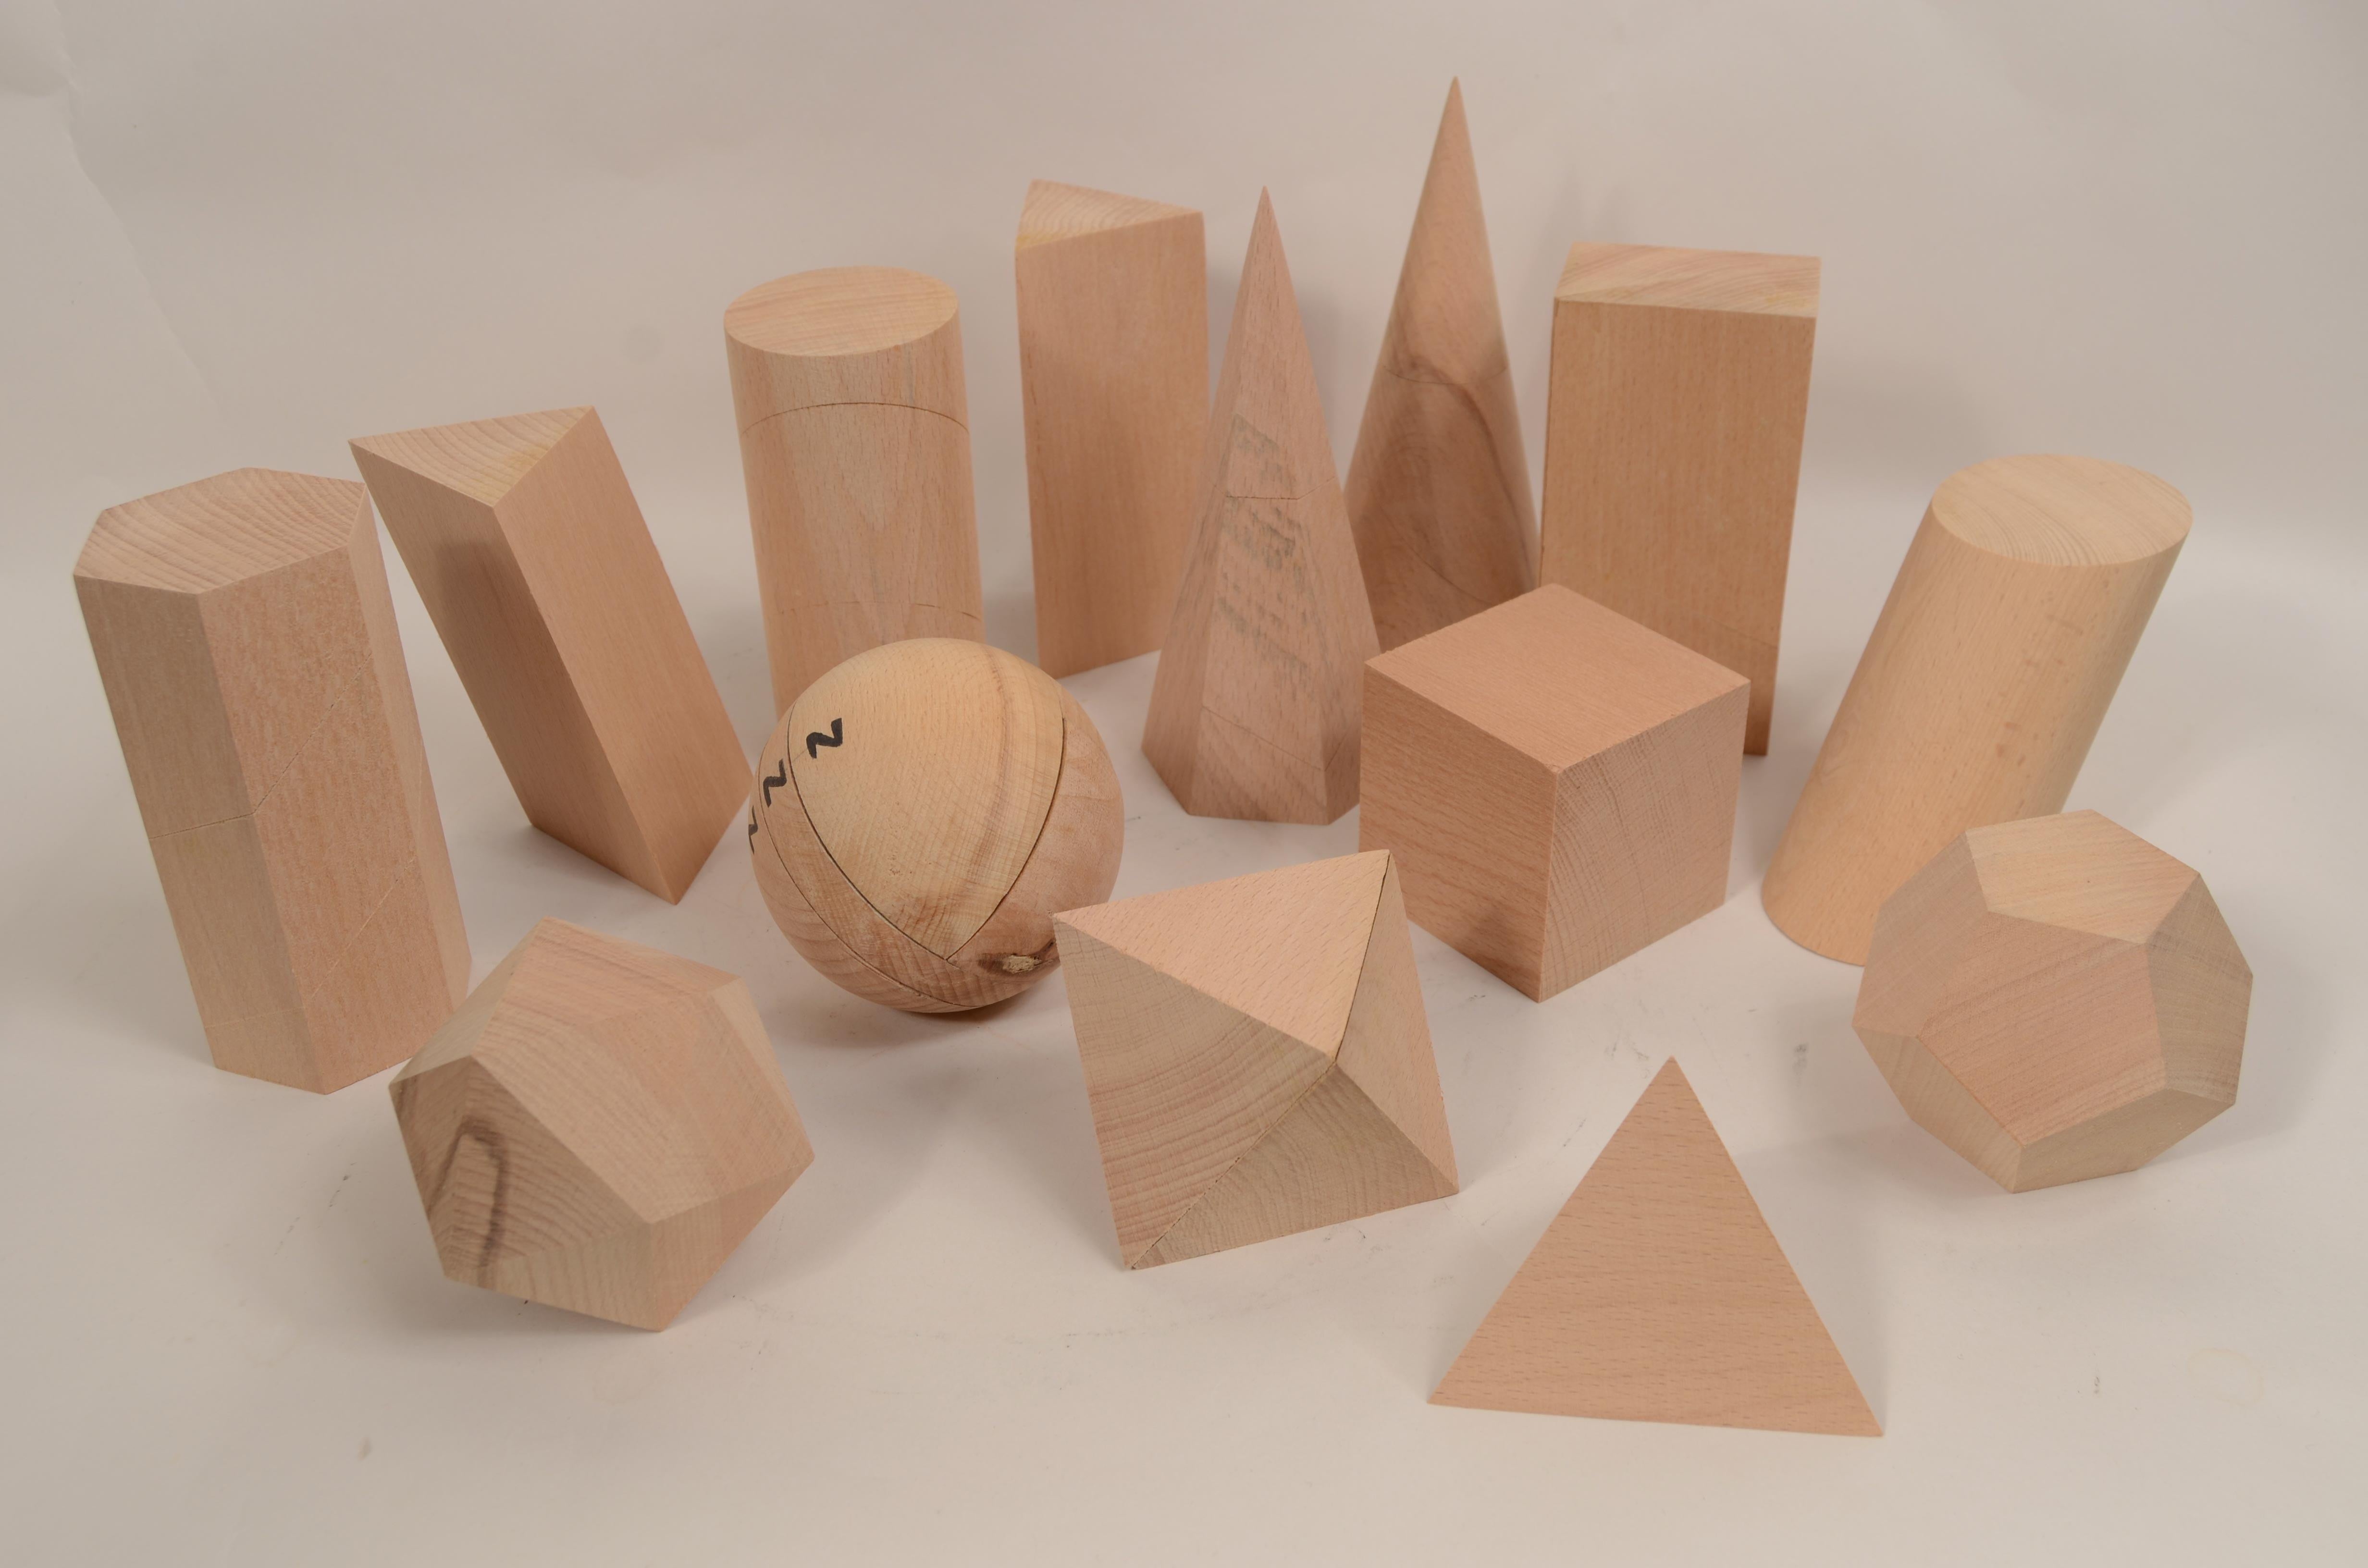 Box containing 14 detachable geometric solids made of oak wood, height 12 cm, housed in their original wooden box. Produced for educational purposes for schools by Antonio Vallardi editore in 1963. Never used. Box size cm36x28x10 - inches